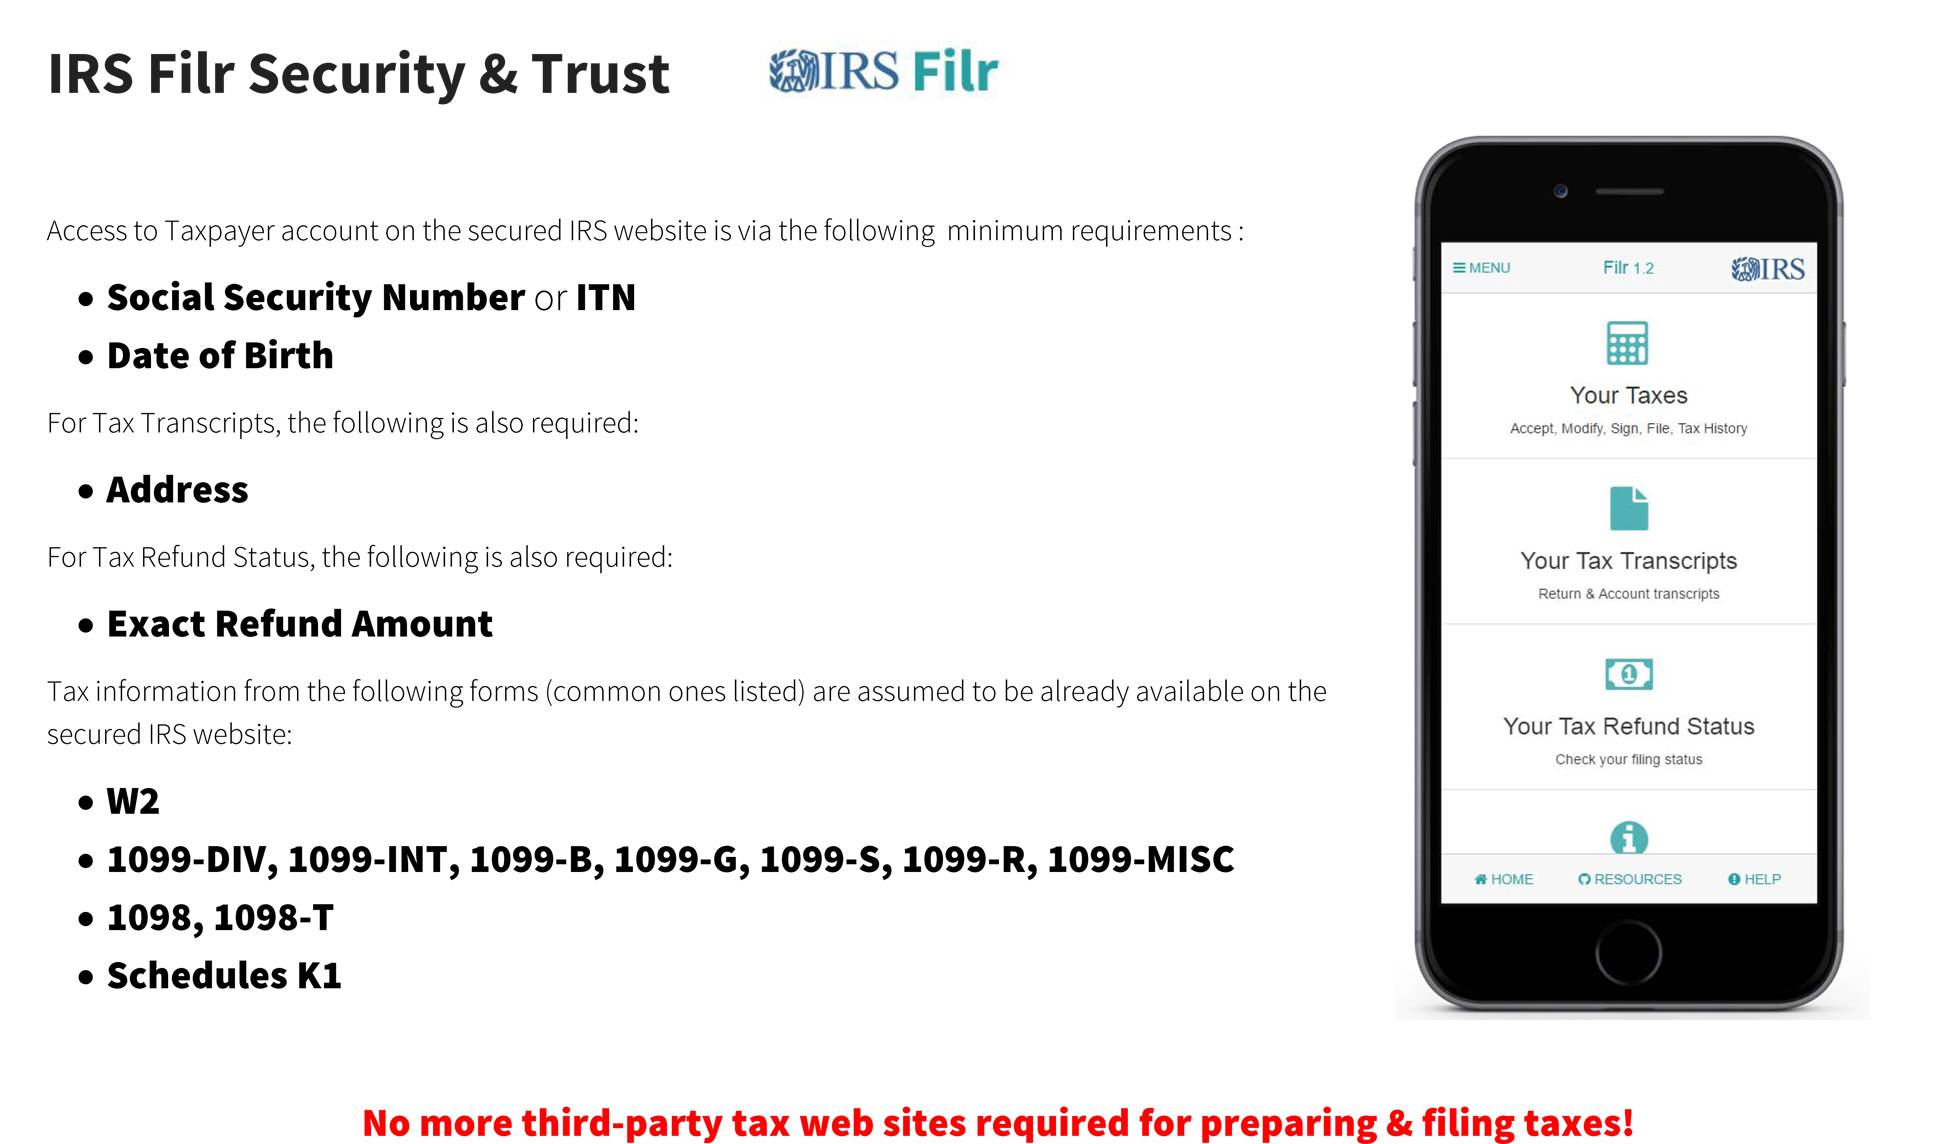 A page from a tax design challenge submission. The IRS Filr Security and Trust mobile app is shown. Registration requirements are listed.